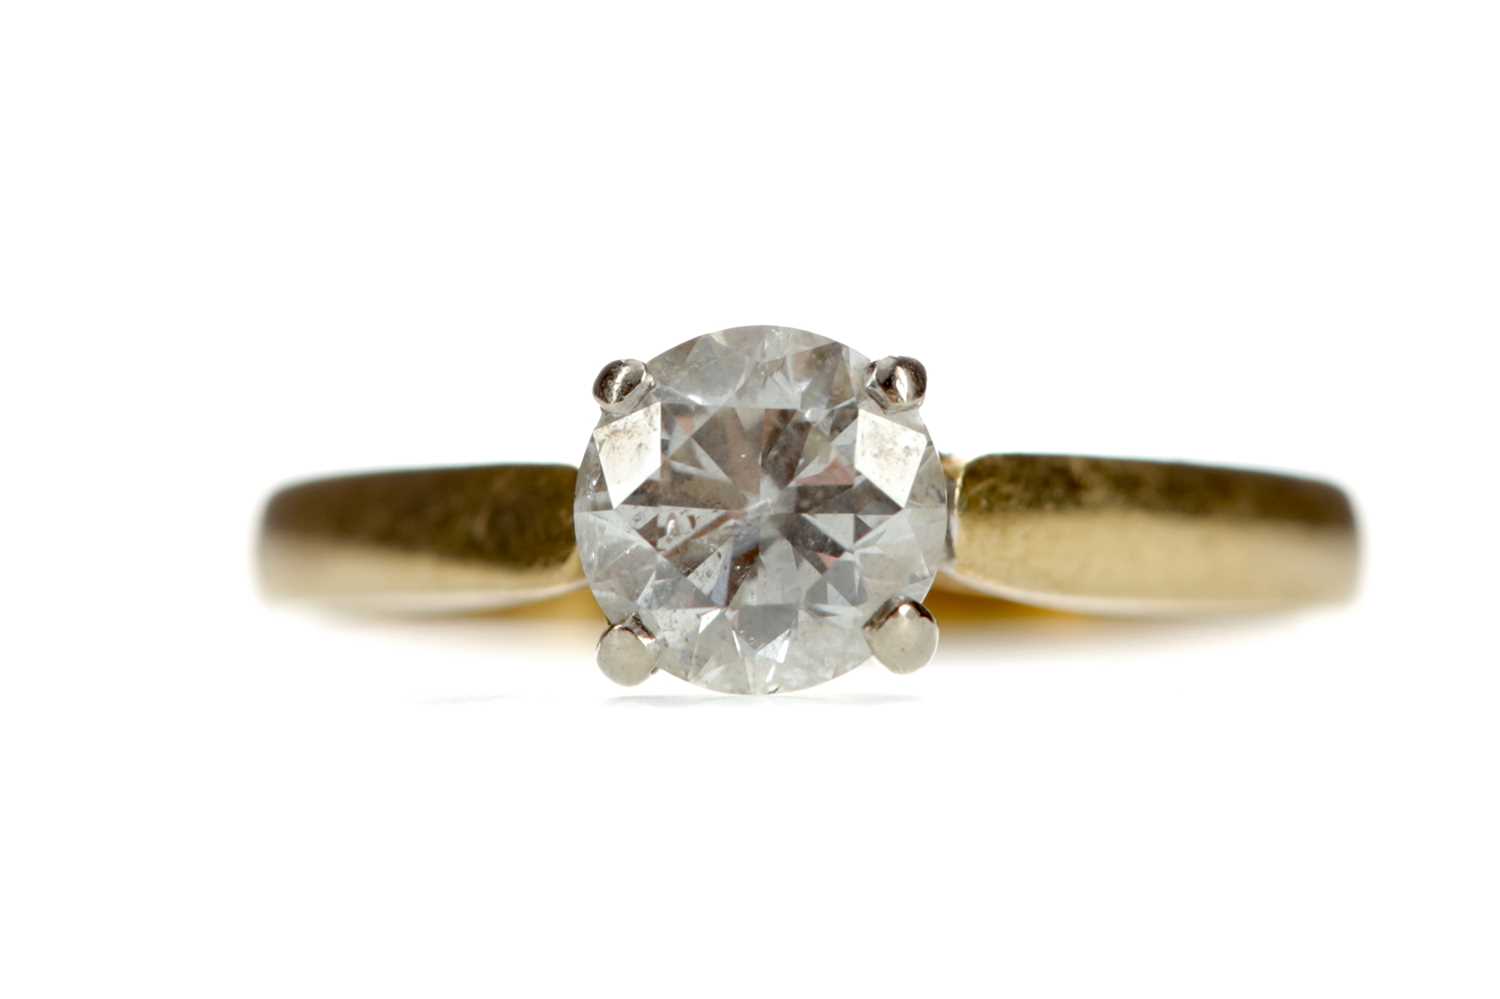 Lot 306 - A DIAMOND SOLITAIRE RING